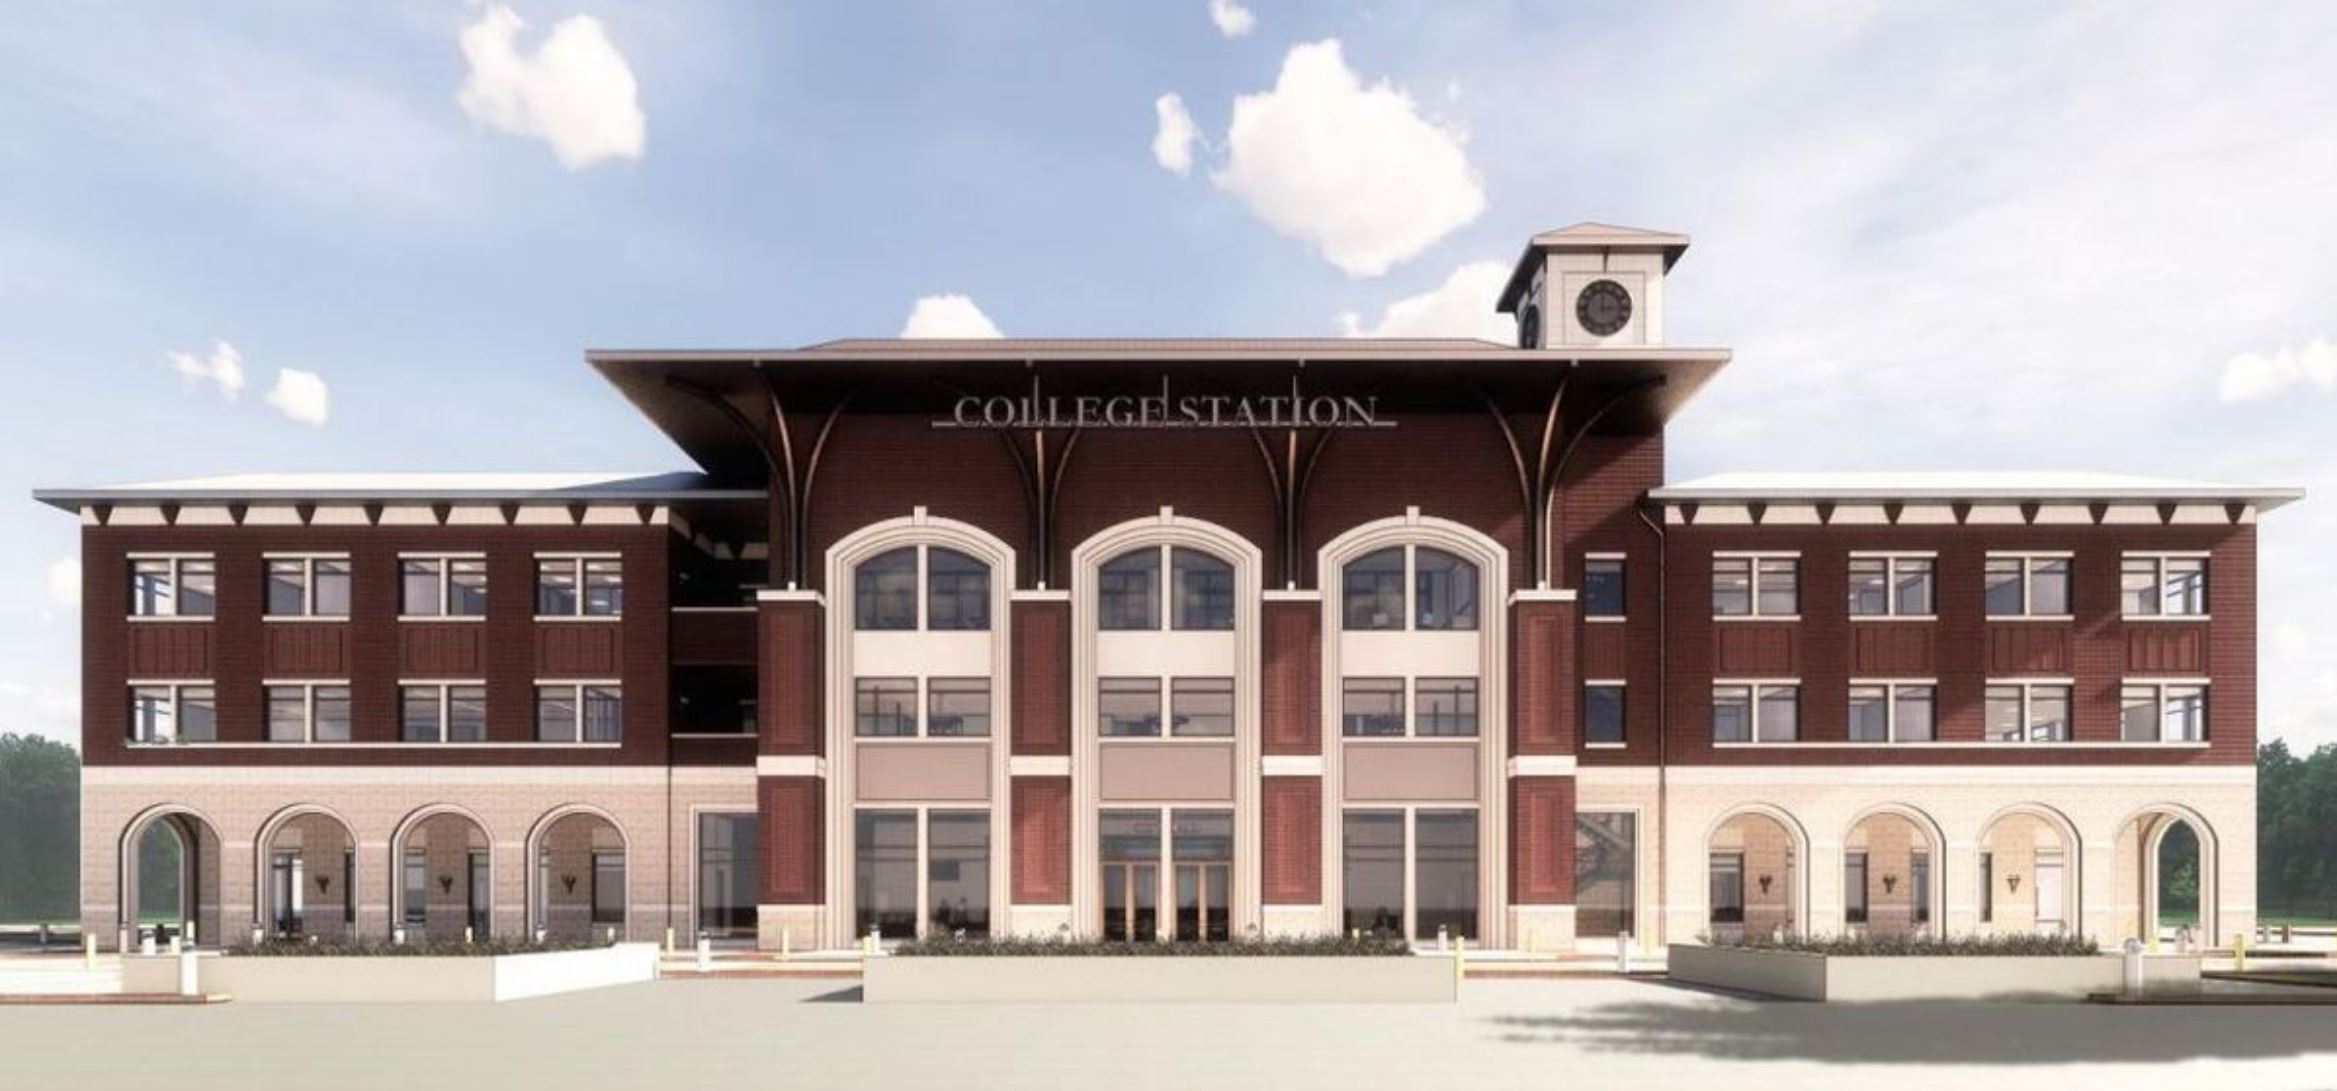 Construction Estimate on College Station's City Hall